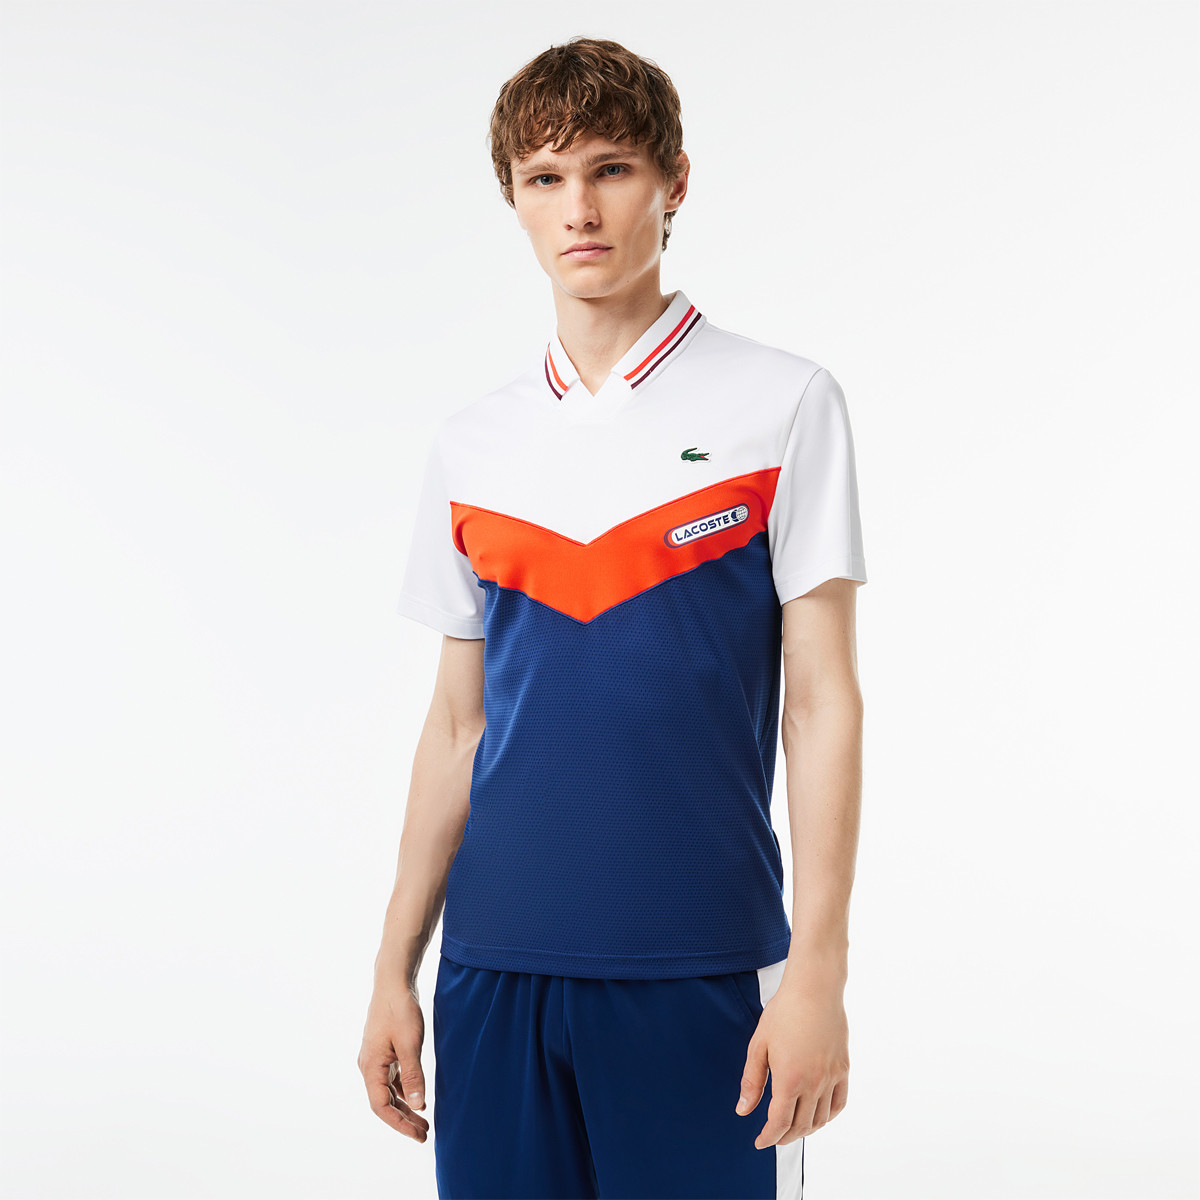 LACOSTE MEDVEDEV US SERIES POLO